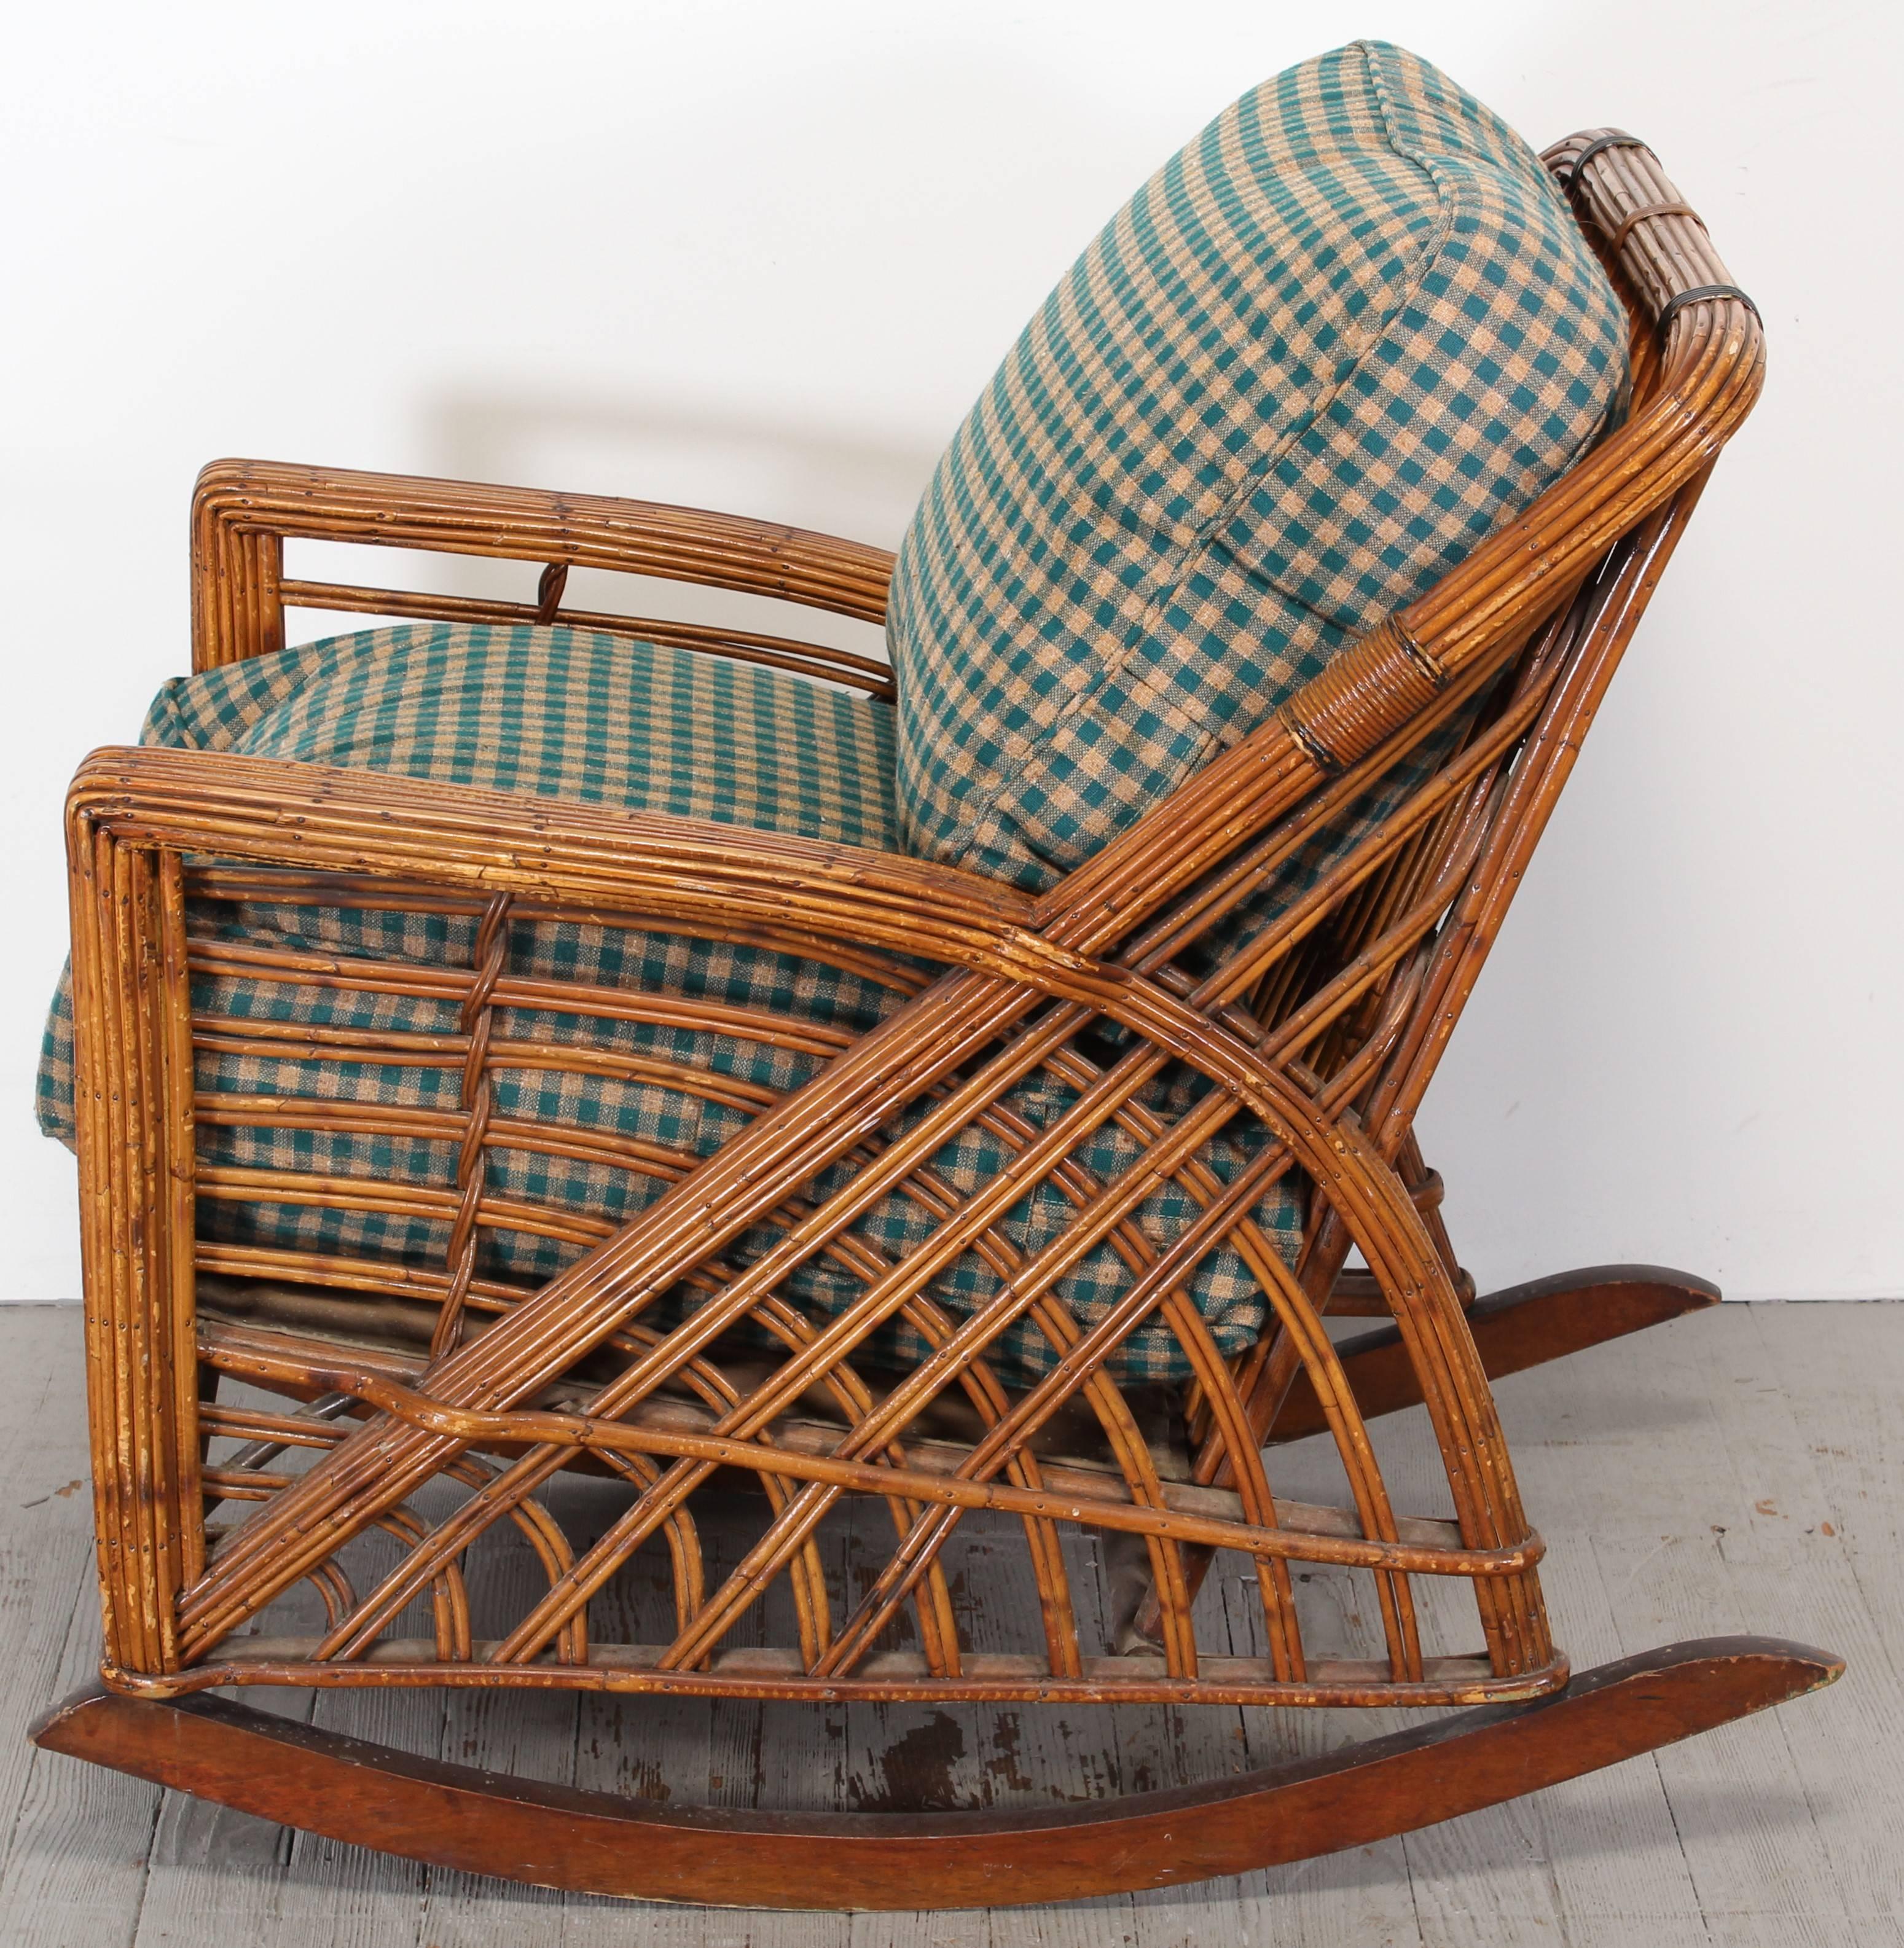 A very rare Art Deco stick reed rattan rocking chair with over stuffed cushions. There is a metal manufacturer's tag "Cramer MFG Co 253 So Fifth St Philadelphia PA". This is an adult rocker. The Cushions are very thick, very plush - soft.